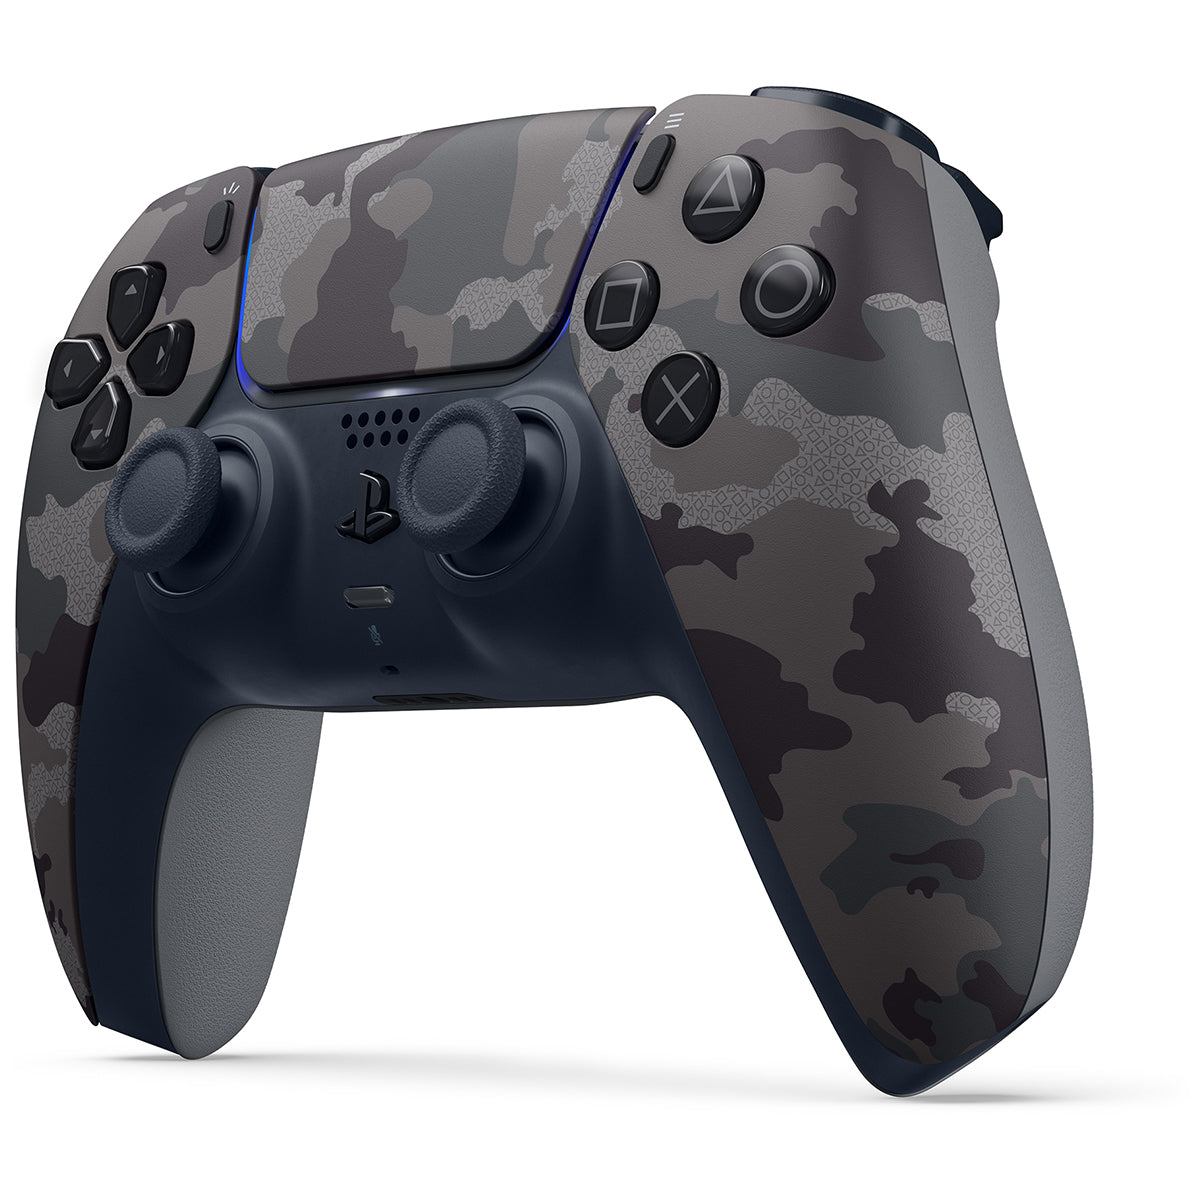 Sony Playstation 5 Disc Edition with Extra Gray Camo Controller and FPS Grip Kit Bundle - Pro-Distributing